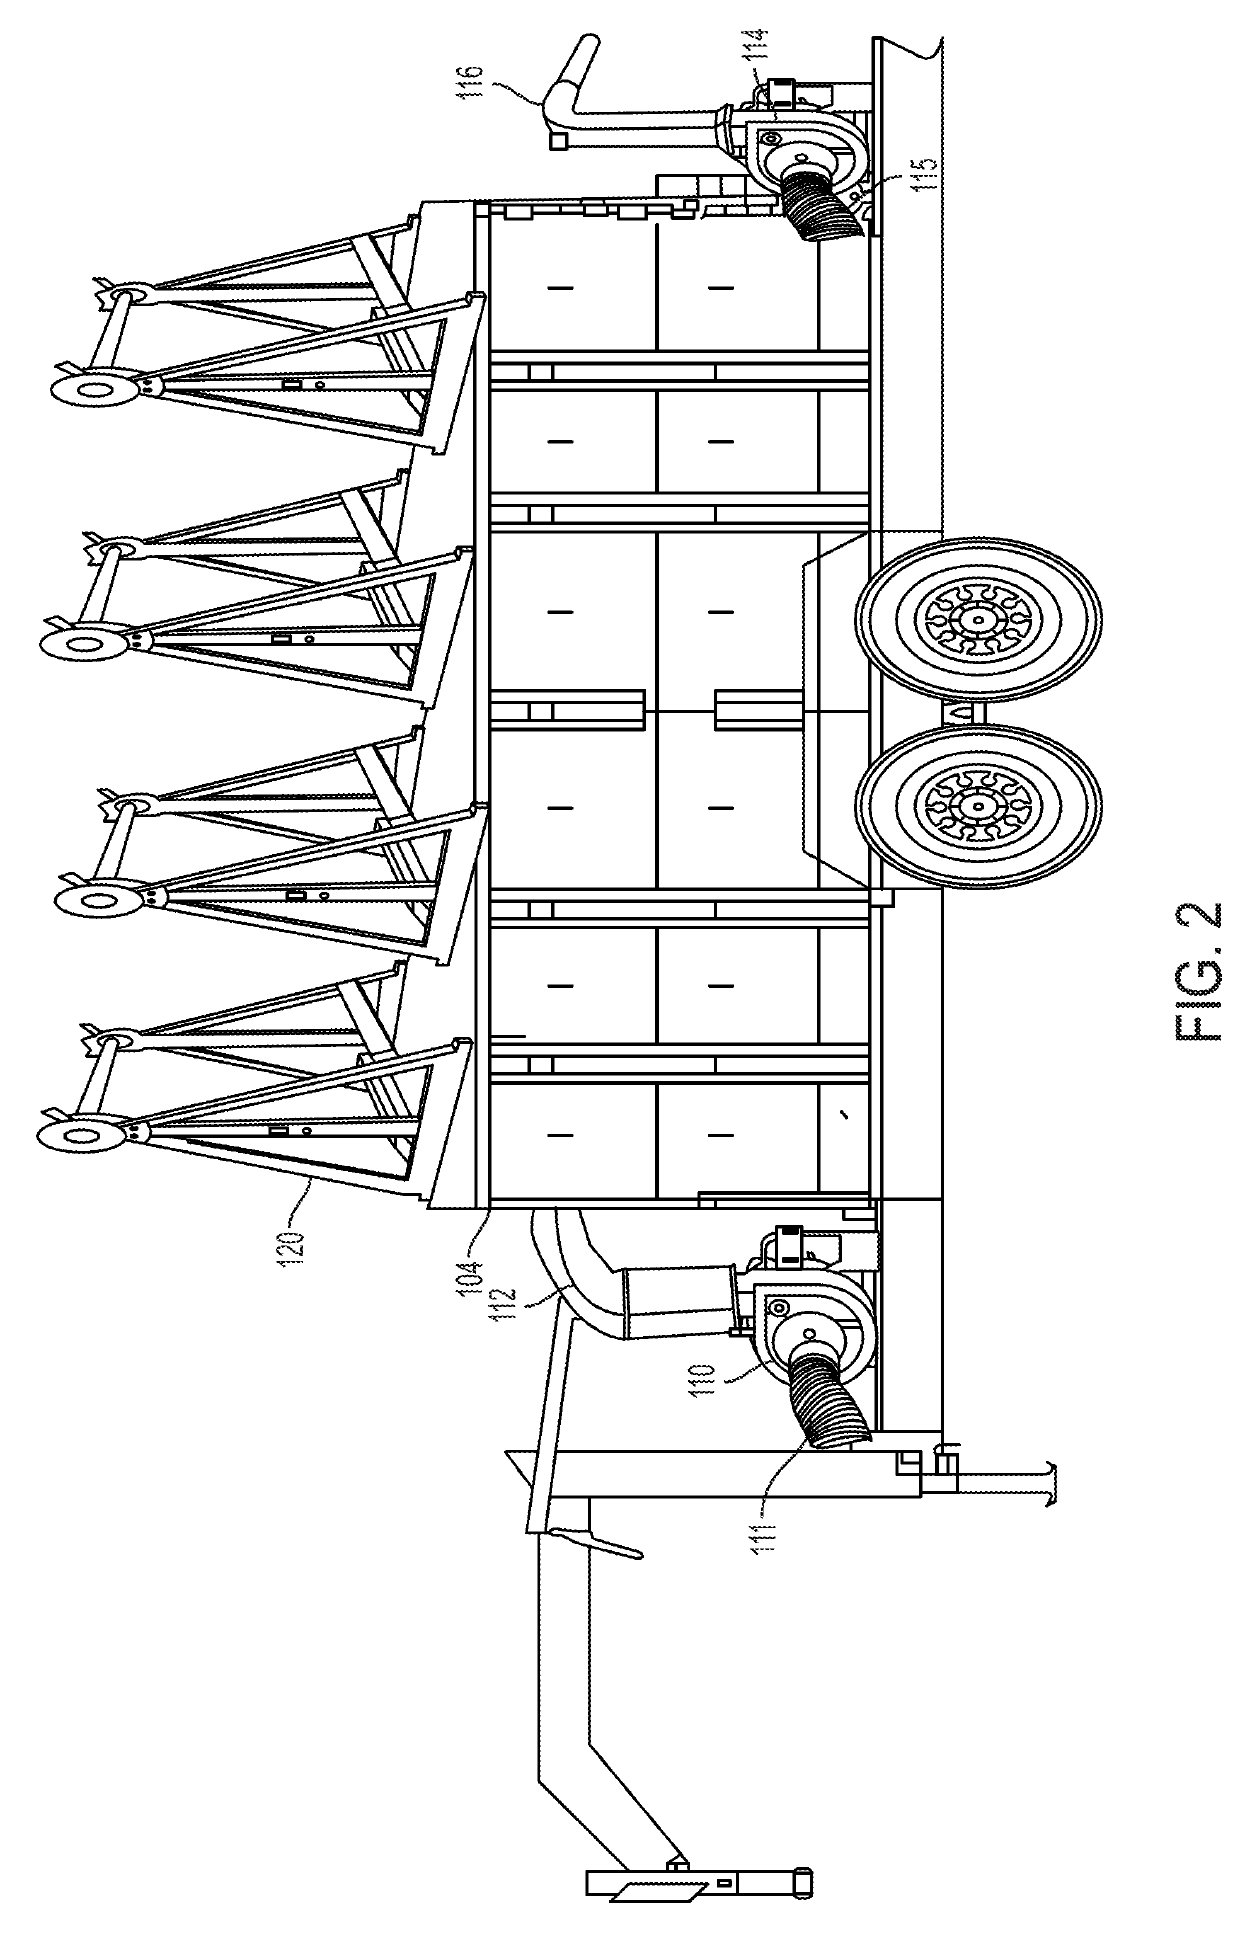 Microtrencher having a utility avoidance safety device and method of microtrenching